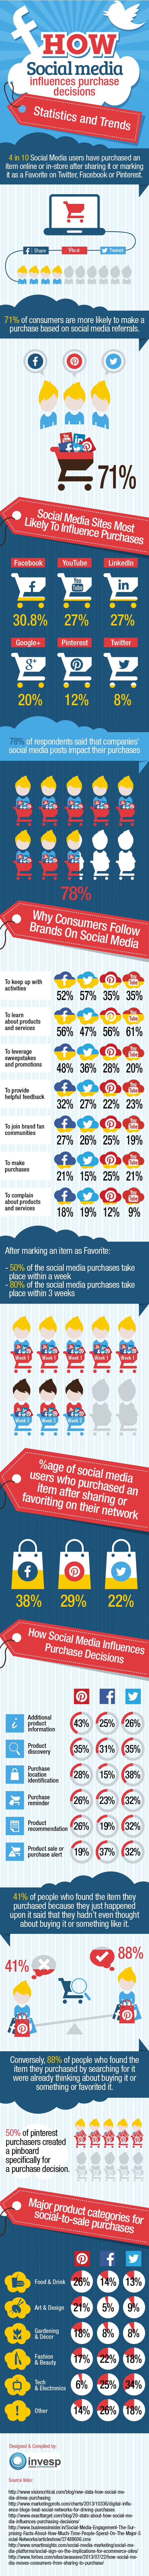 social-media-purchase-decisions